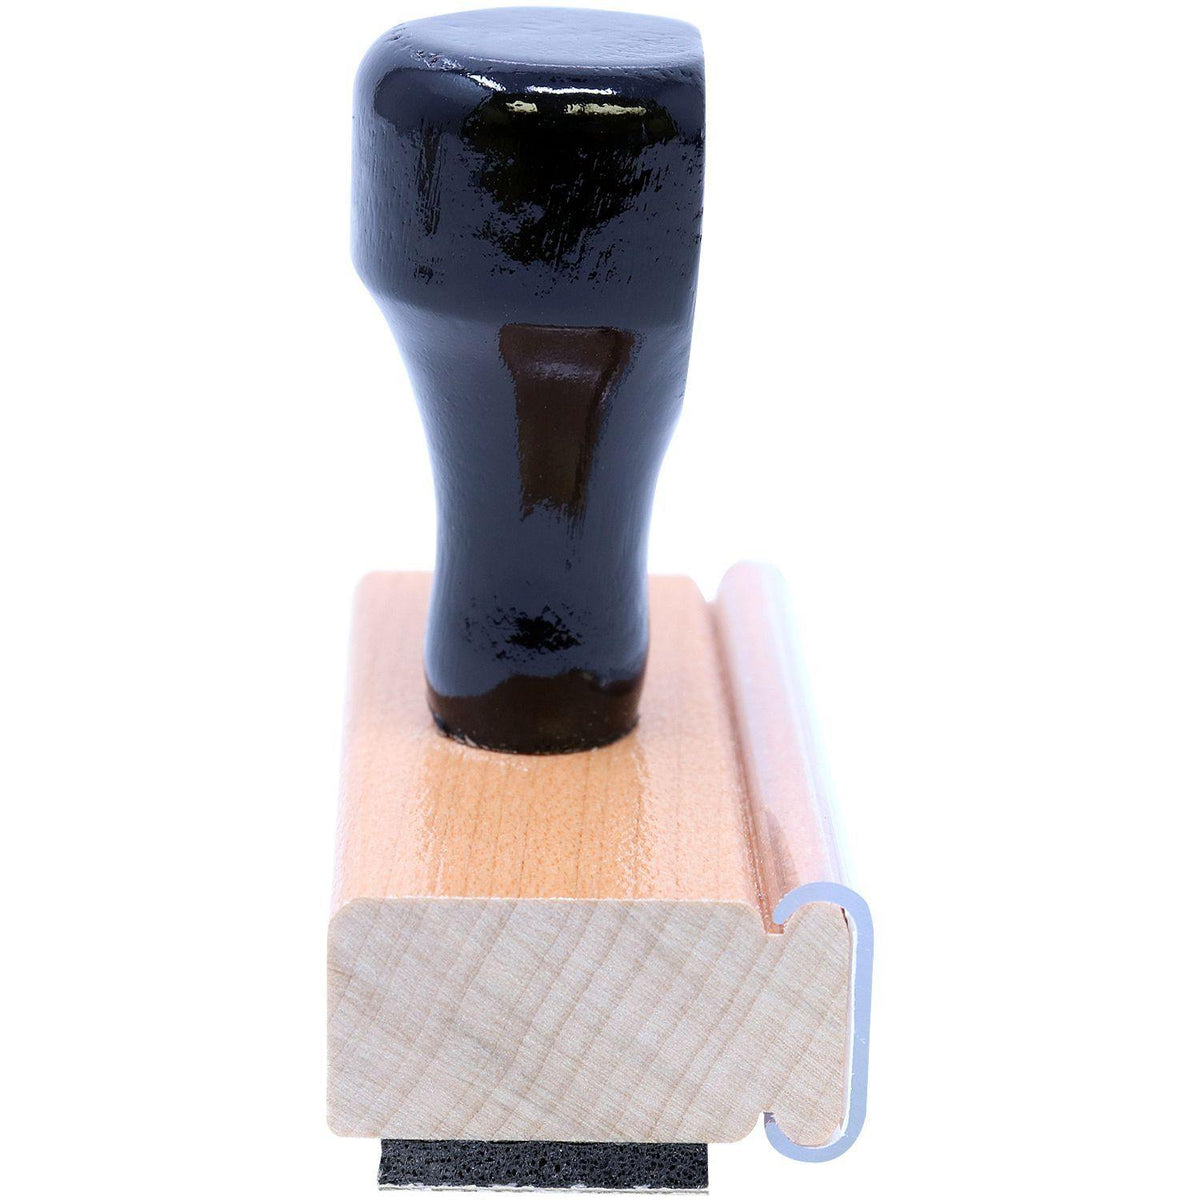 Narrow Font First Class Mail Rubber Stamp - Engineer Seal Stamps - Brand_Acorn, Impression Size_Small, Stamp Type_Regular Stamp, Type of Use_Business, Type of Use_Postal &amp; Mailing, Type of Use_Professional